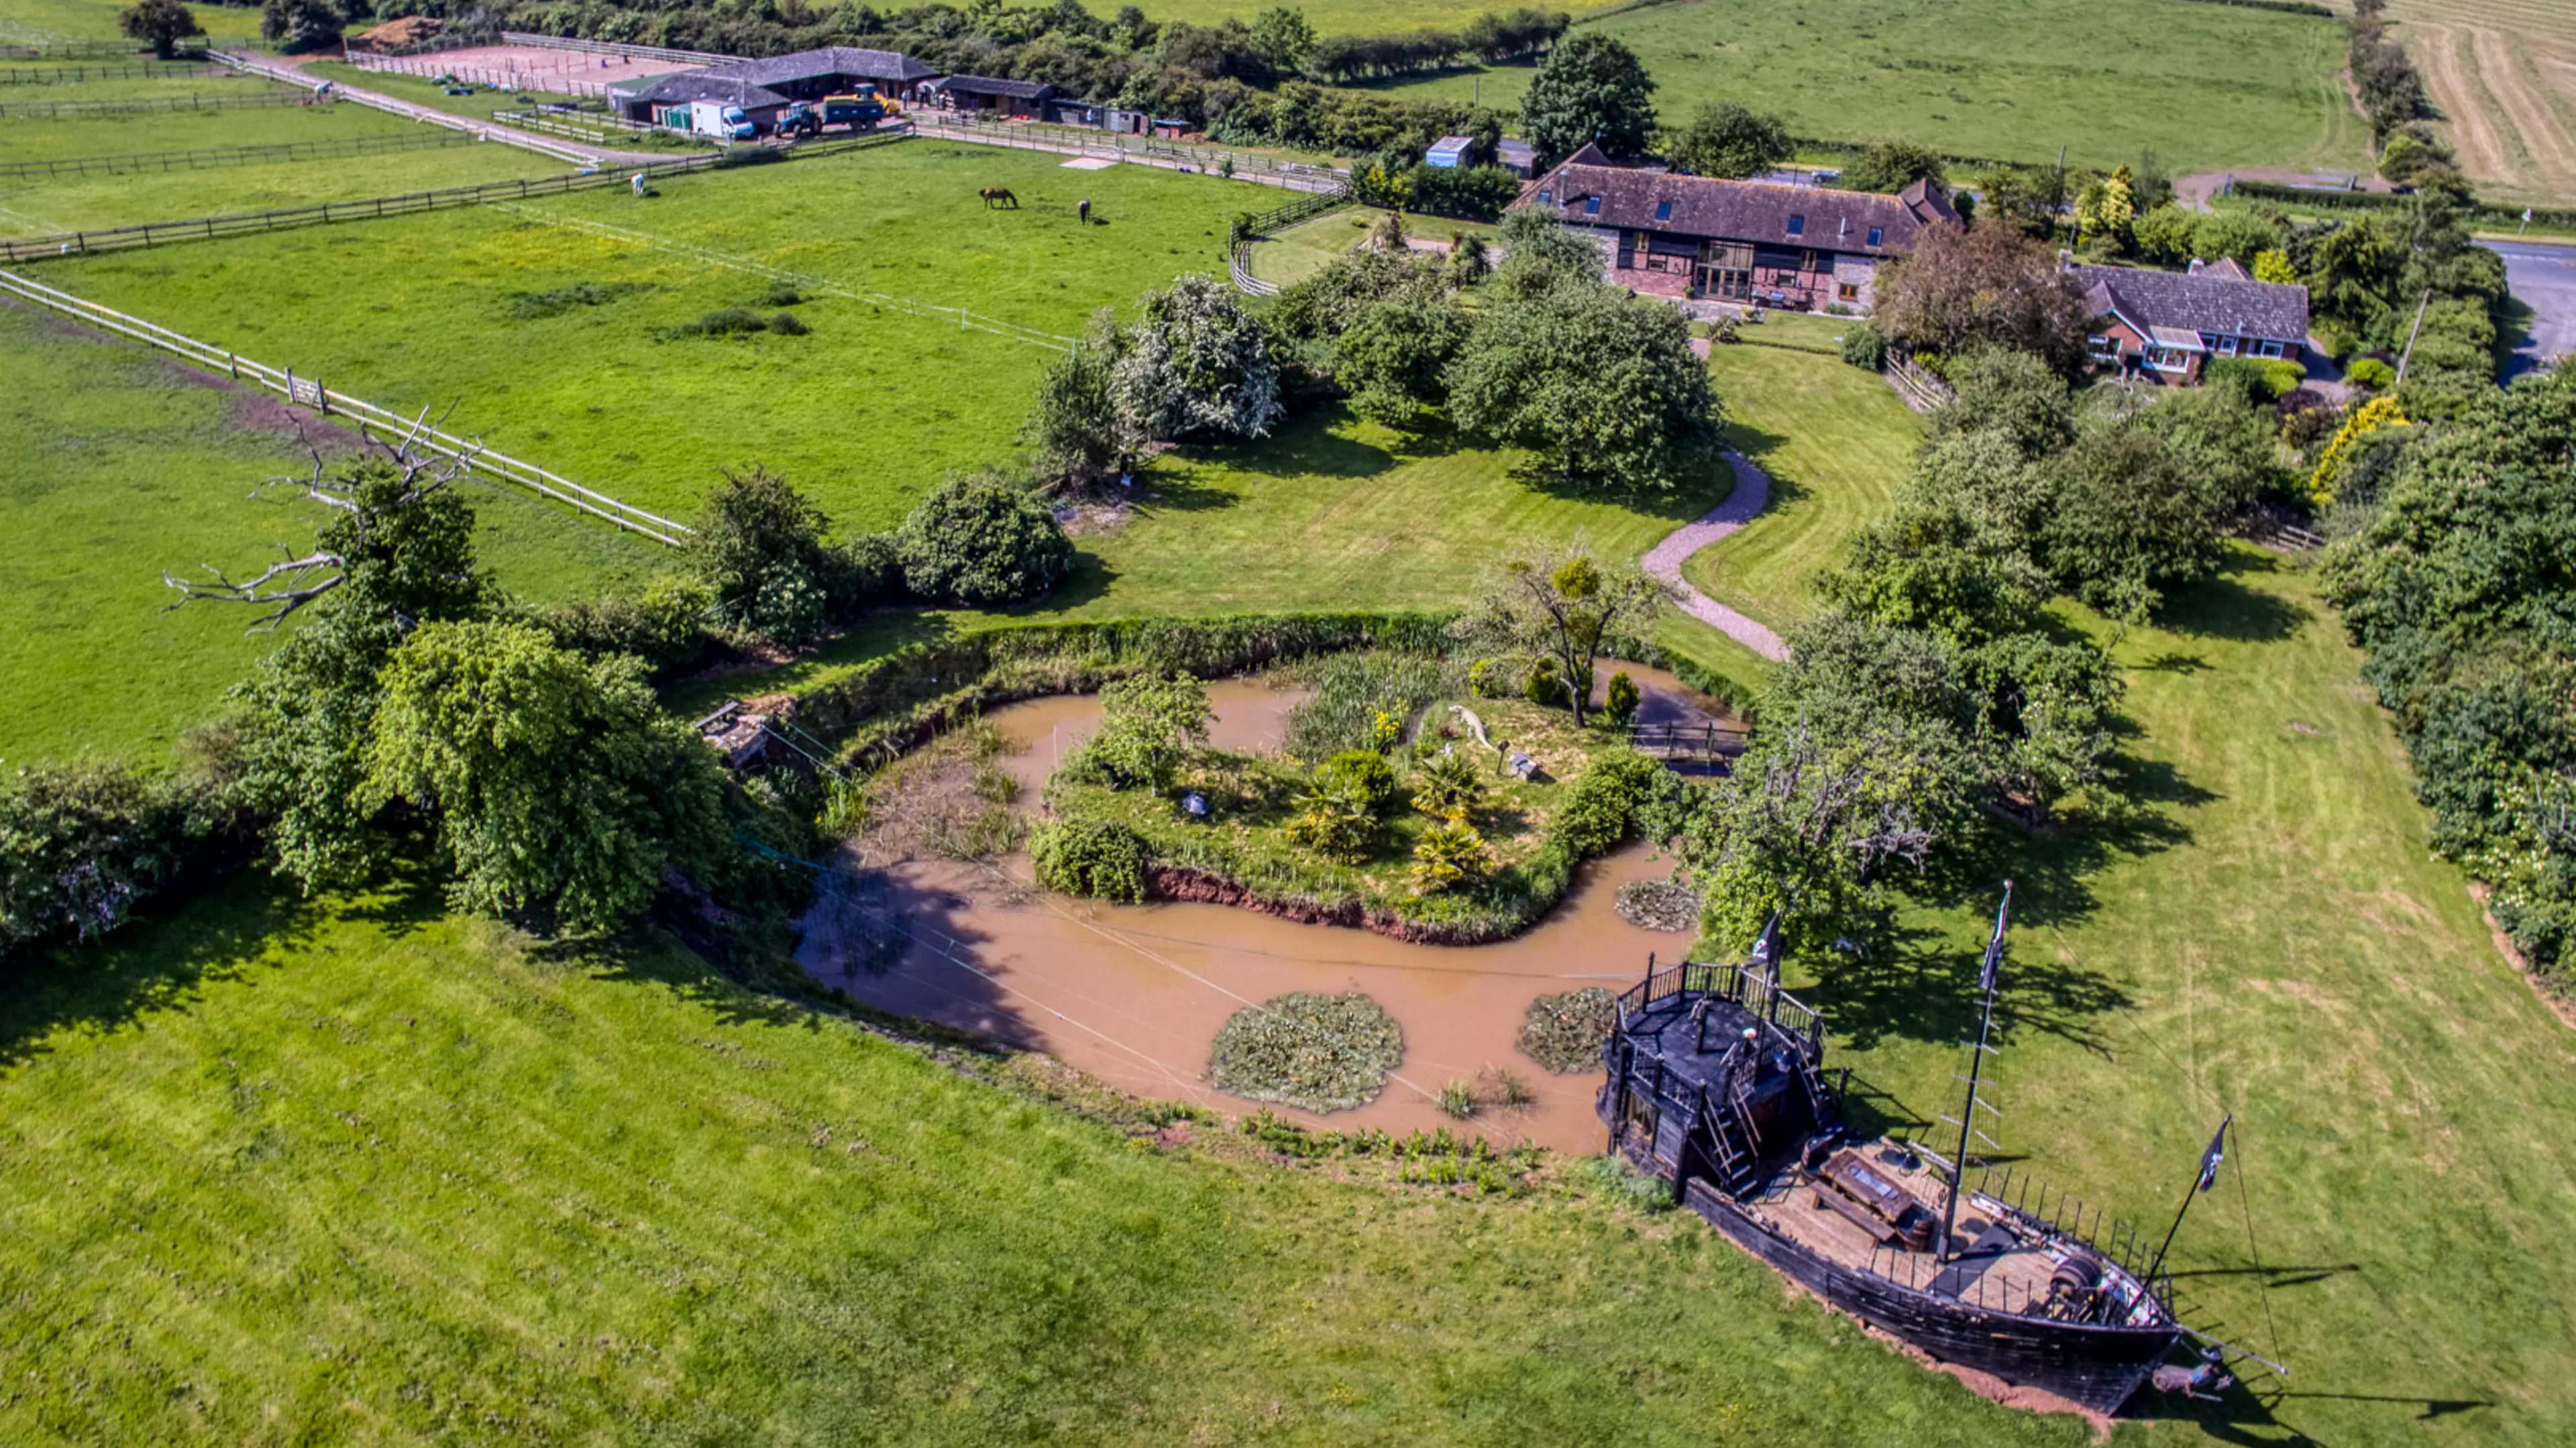 Country Retreat With Very Own Pirate Ship Could Be Yours For £1.25 Million